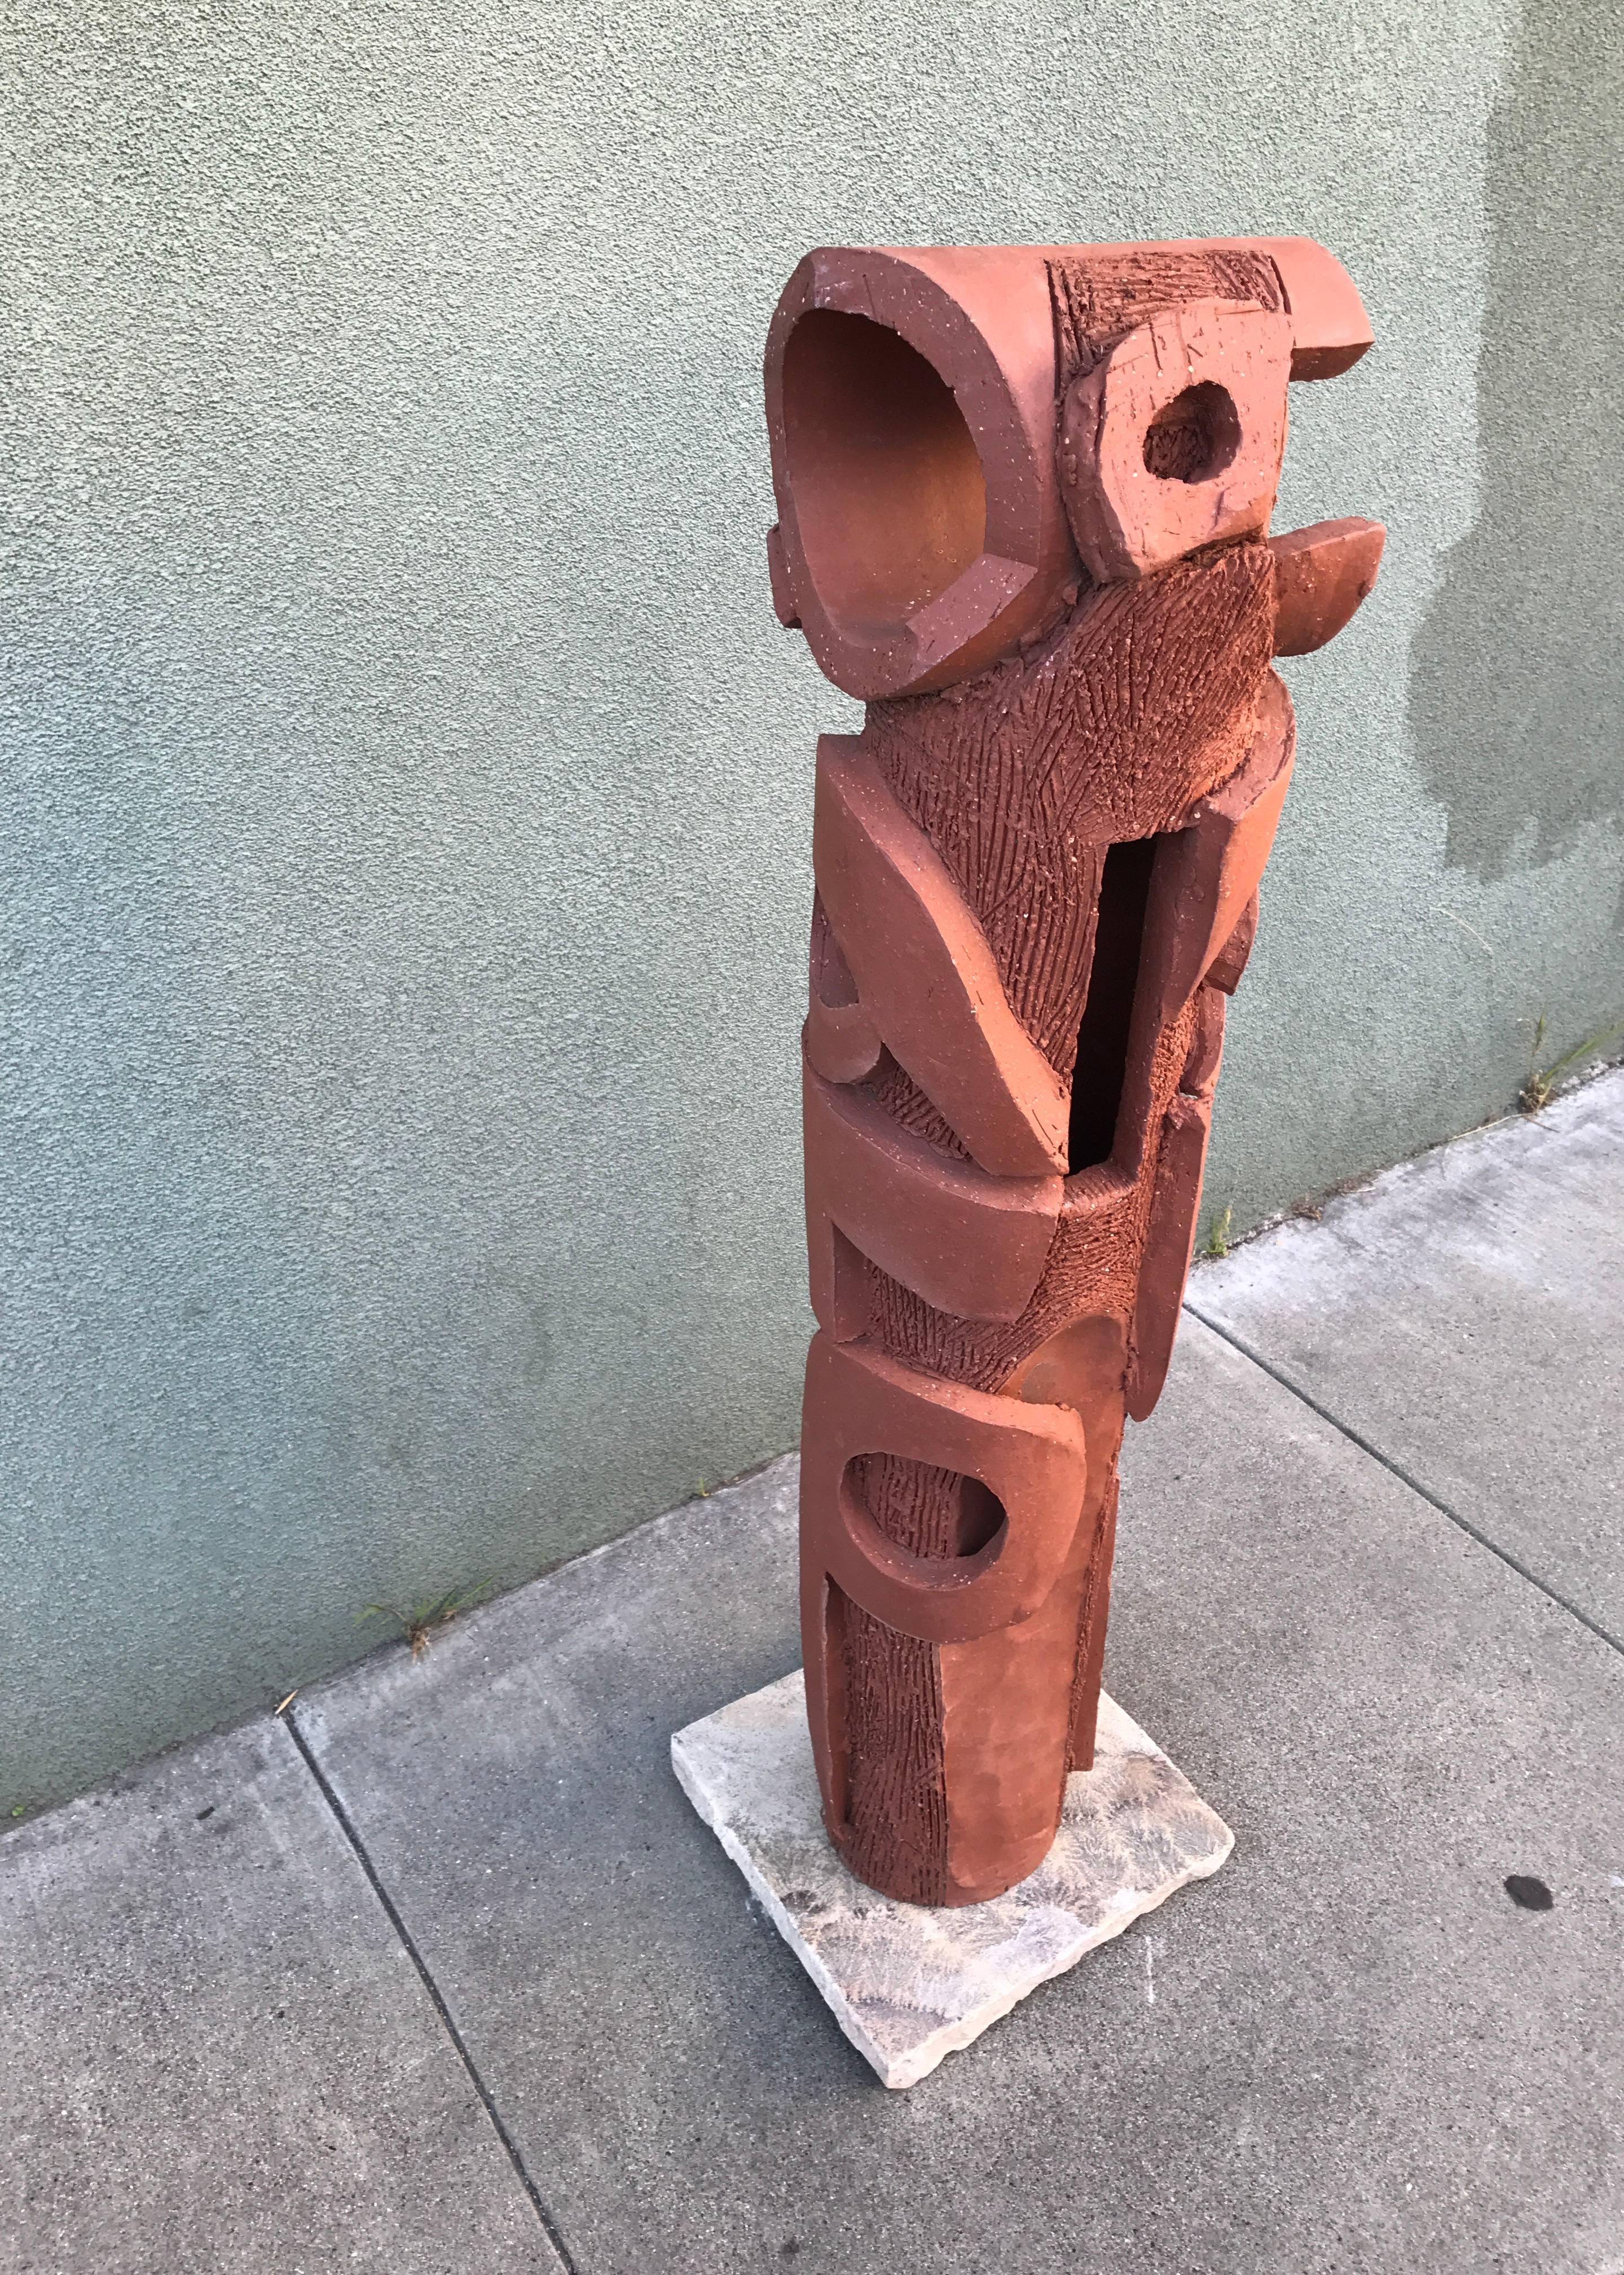 Large 1970s, Bay Area Ceramic Abstract or Bruttalist Sculpture TOTEM #1 3